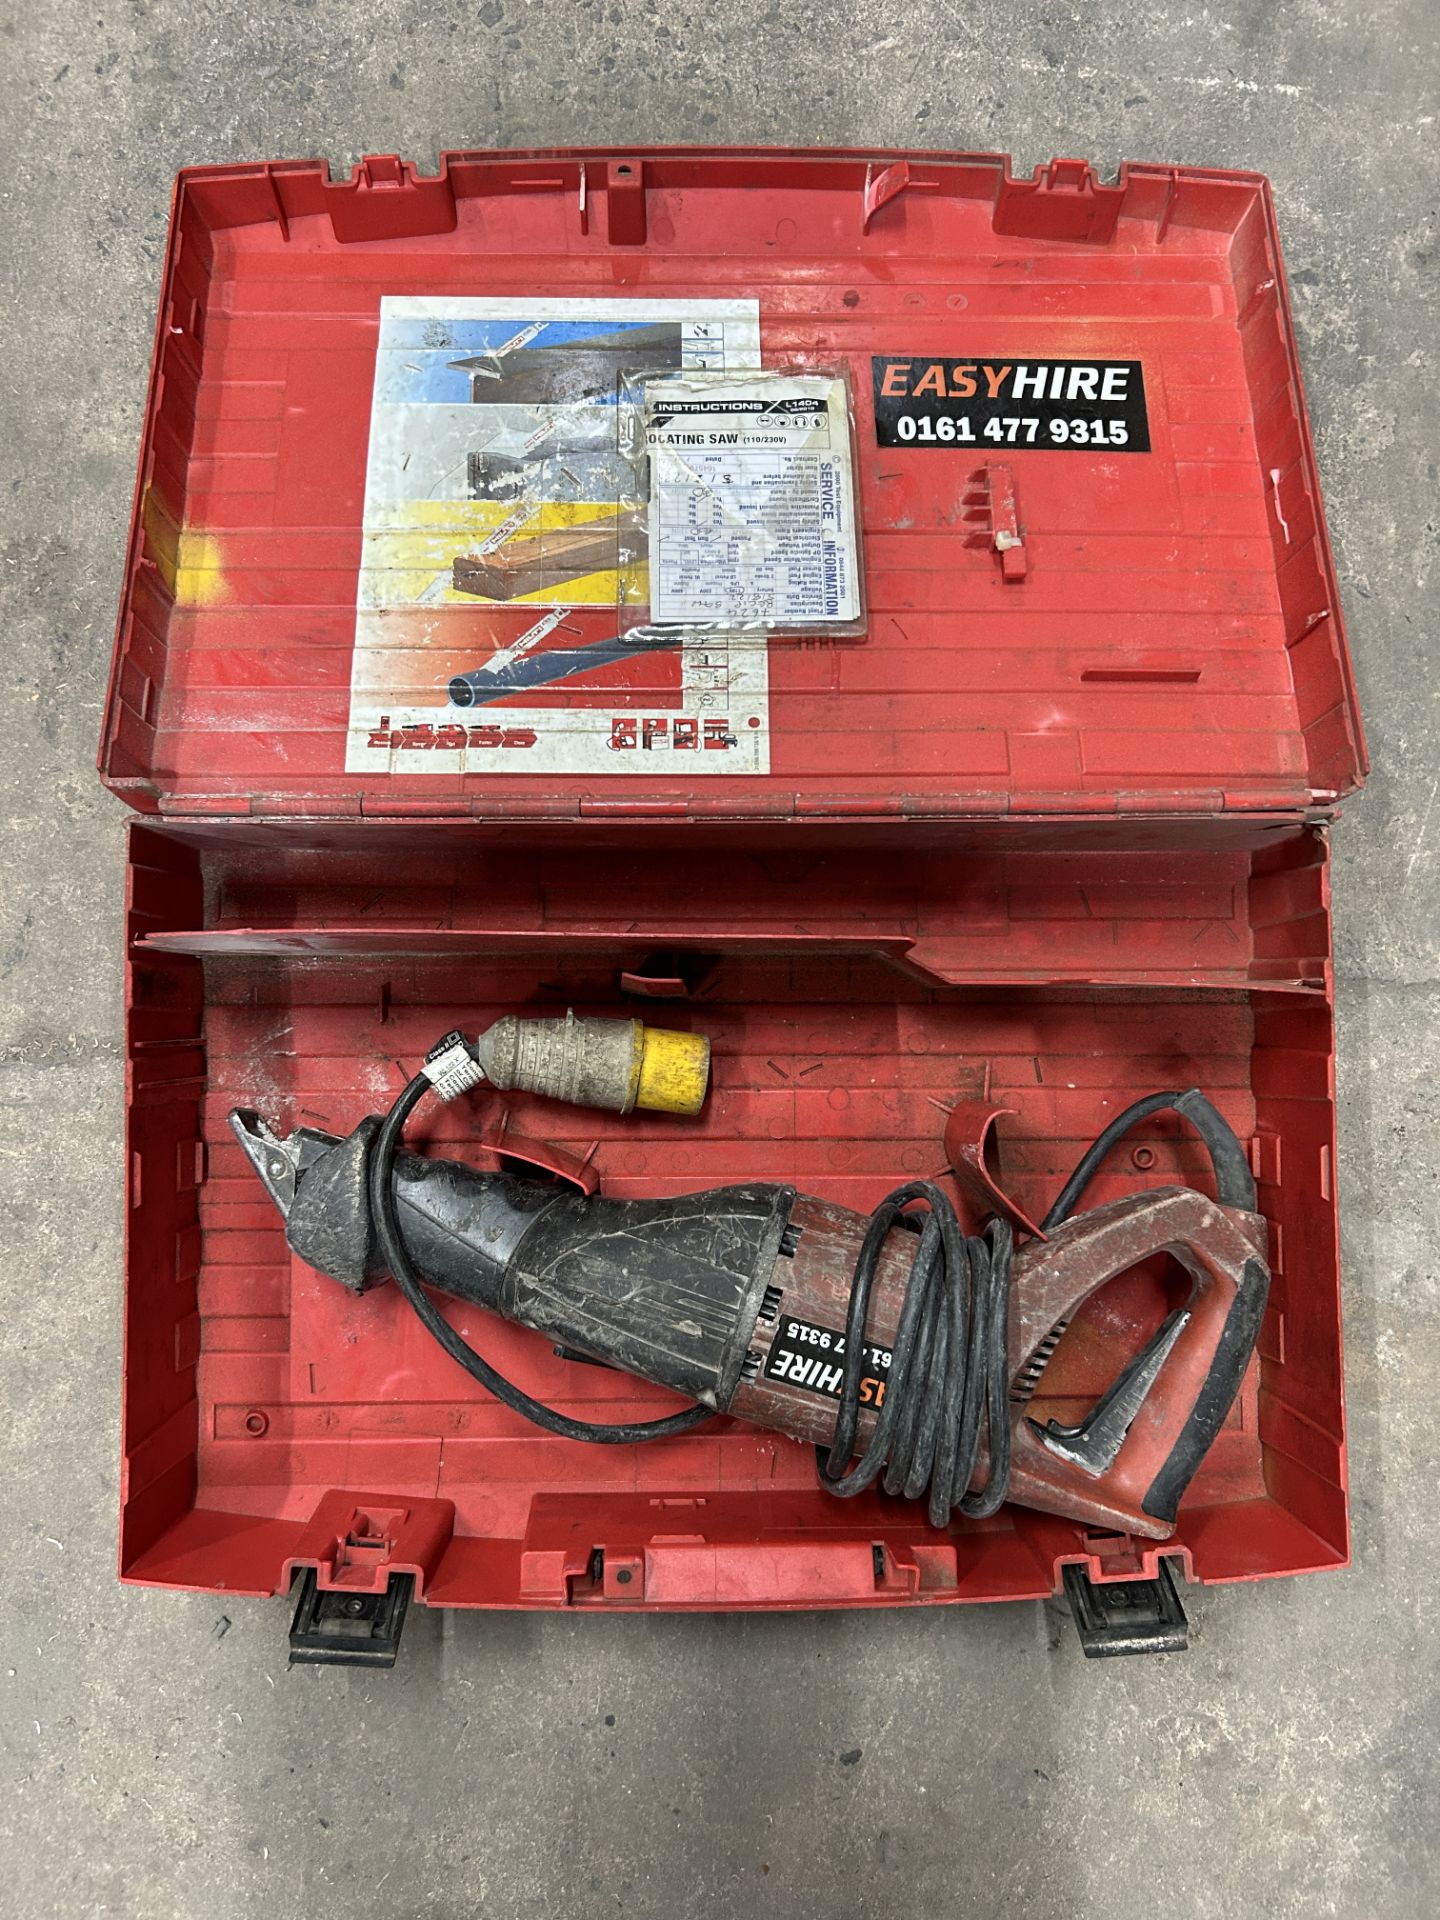 Hilti Corded Reciprocating Saw in Case